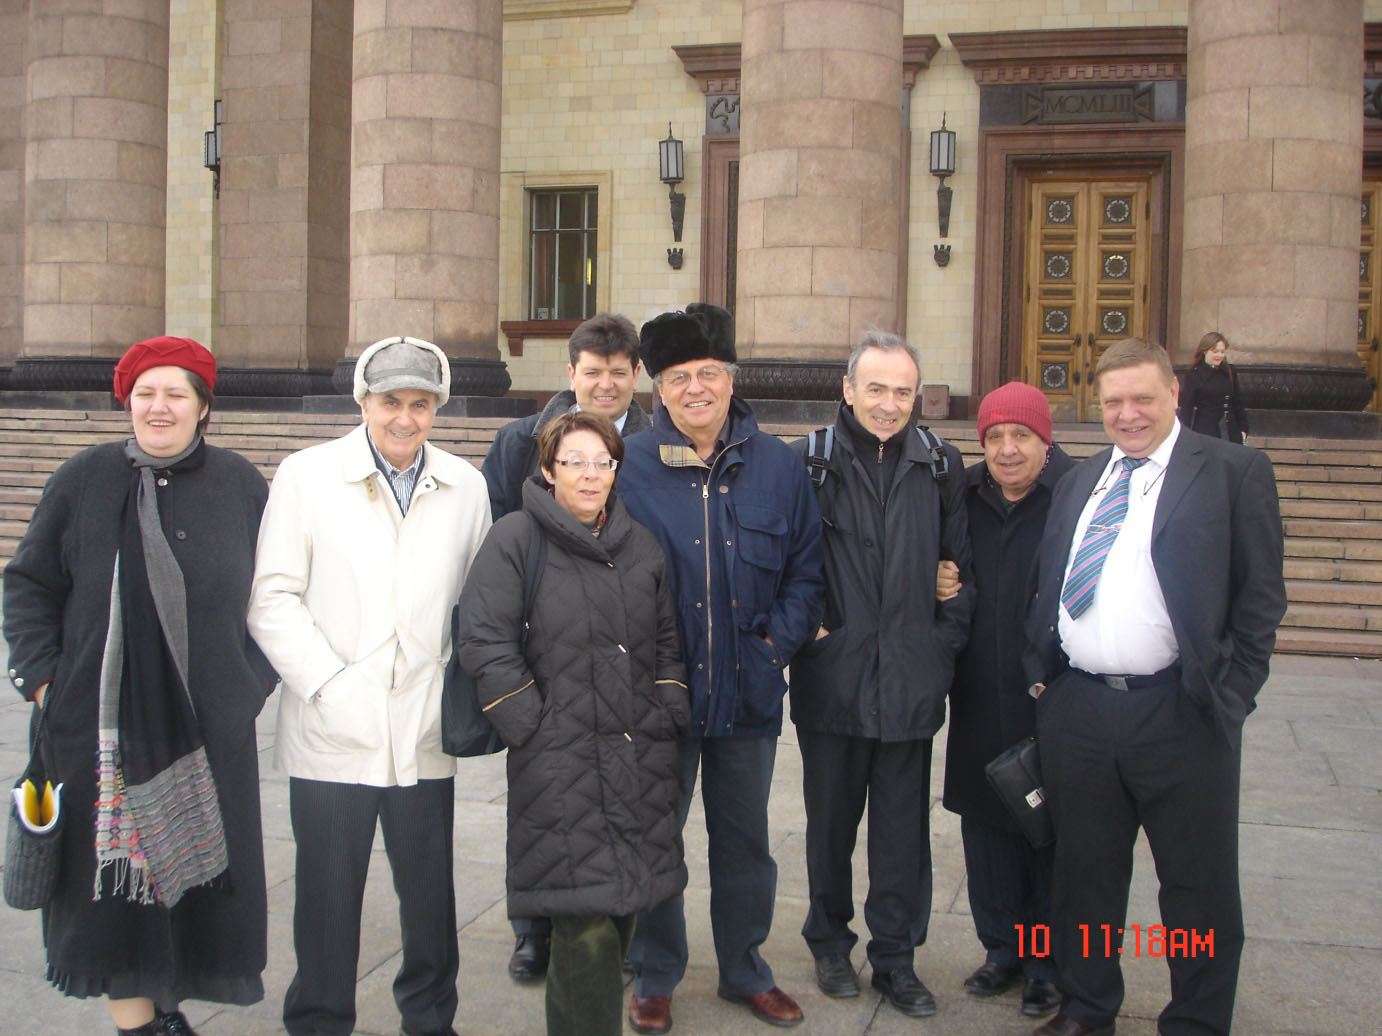 Professor Aivazian with a group of colleagues having participated to a joint seminar on the “Multivariate Statistical Analysis and the Stochastic Modeling of Real Processes” held in Moscow, April 2007.